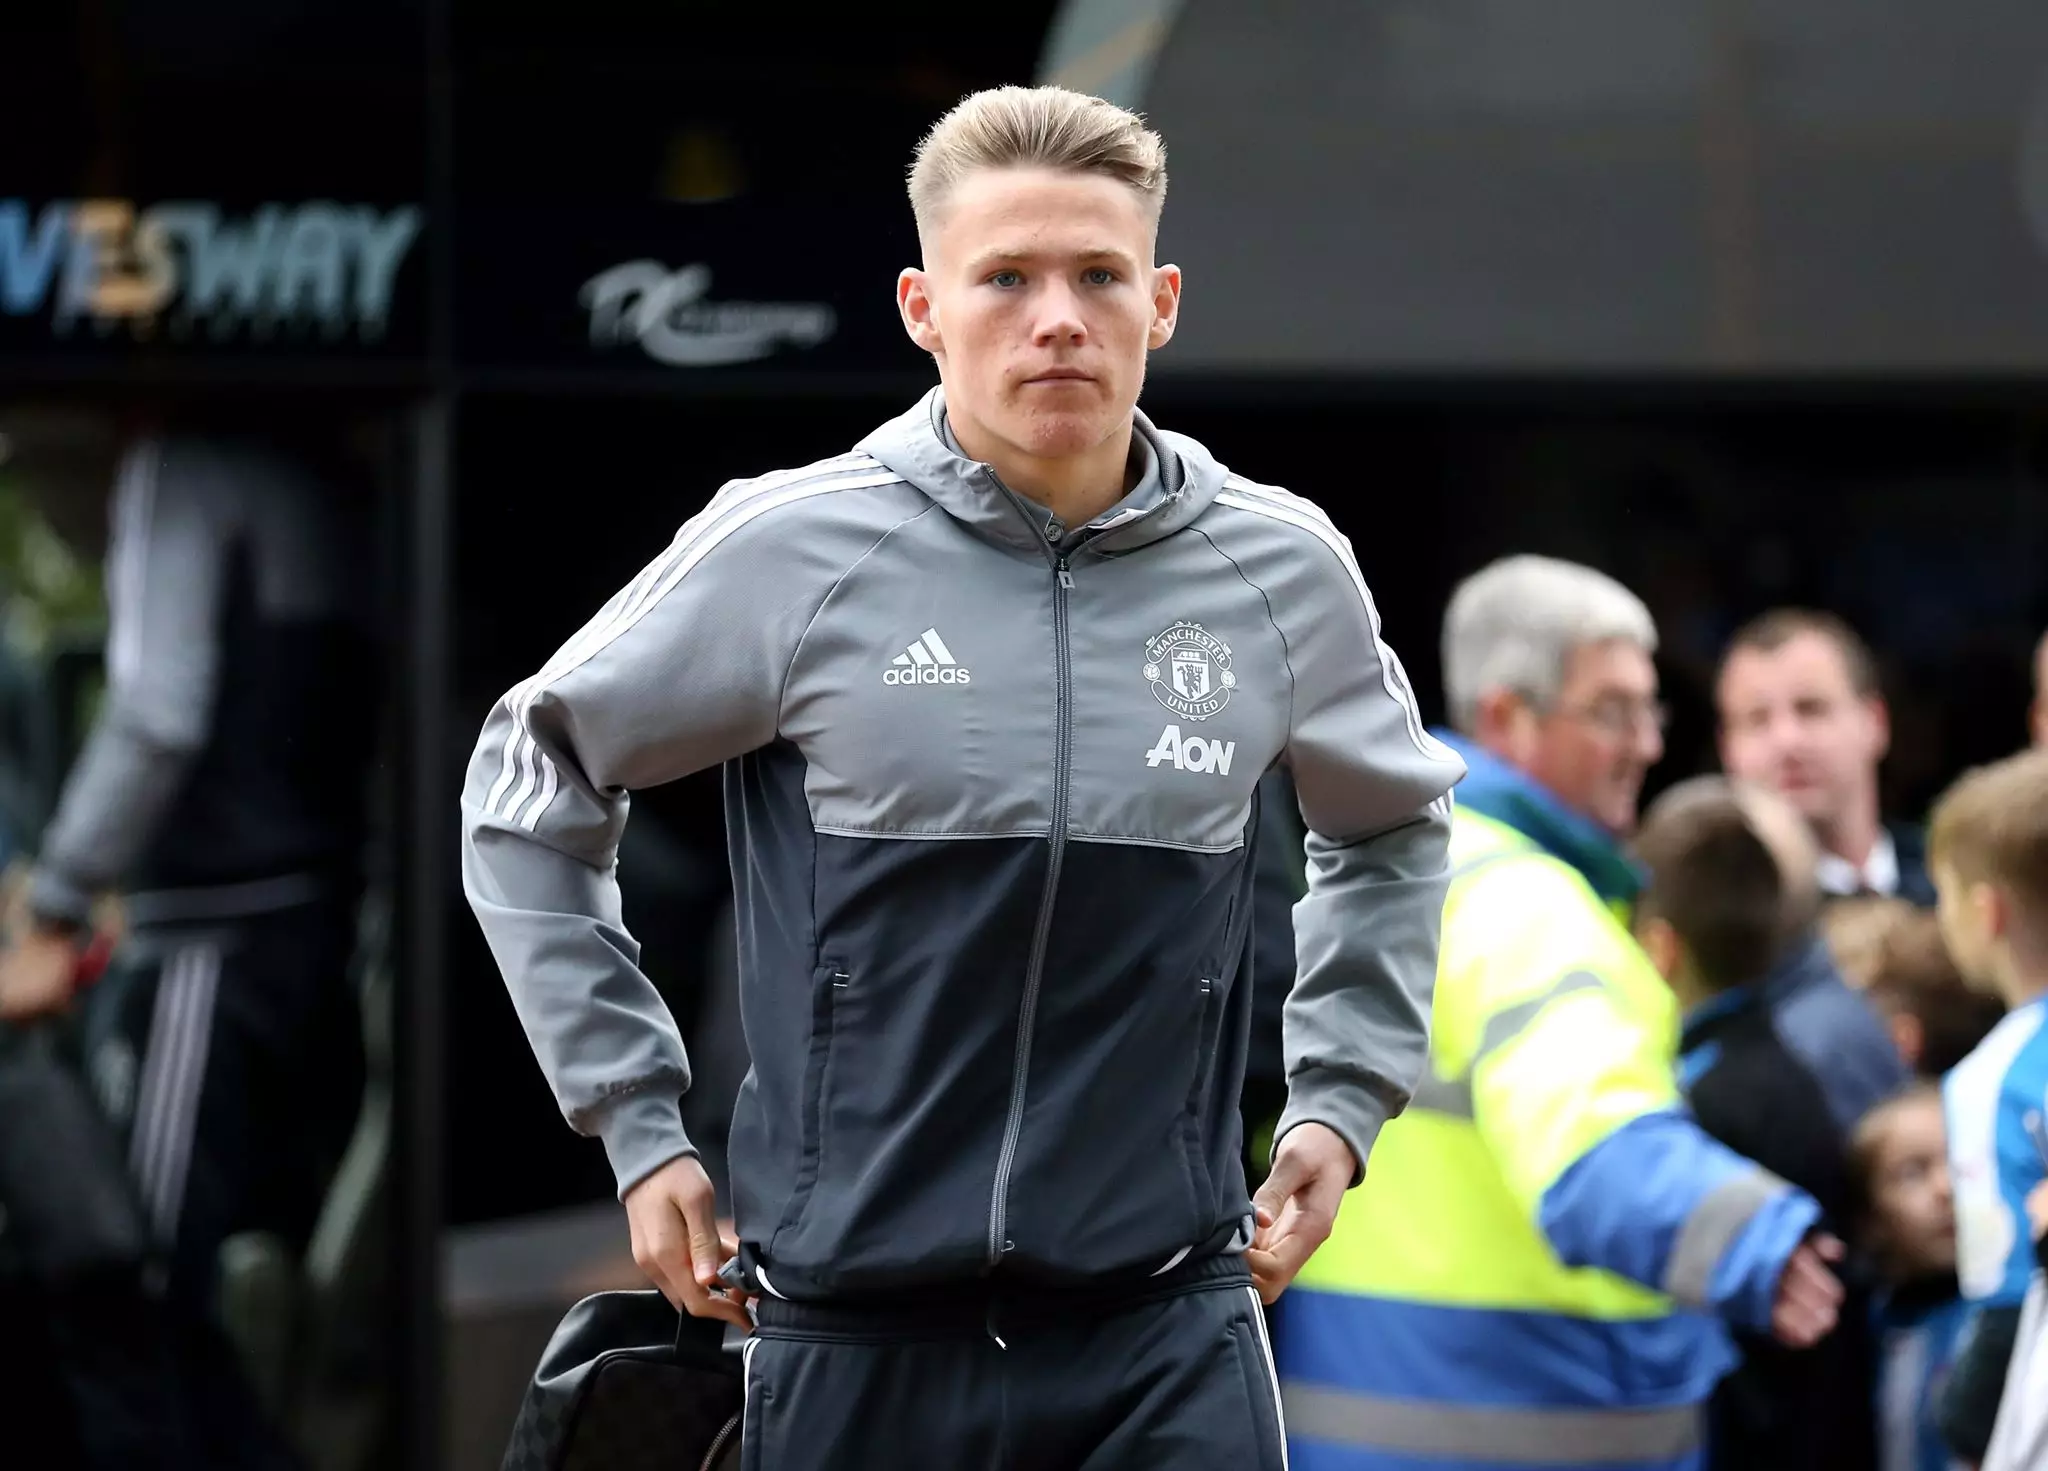 McTominay initially replaced Pogba when the Frenchman was ill recently. Image: PA Images.